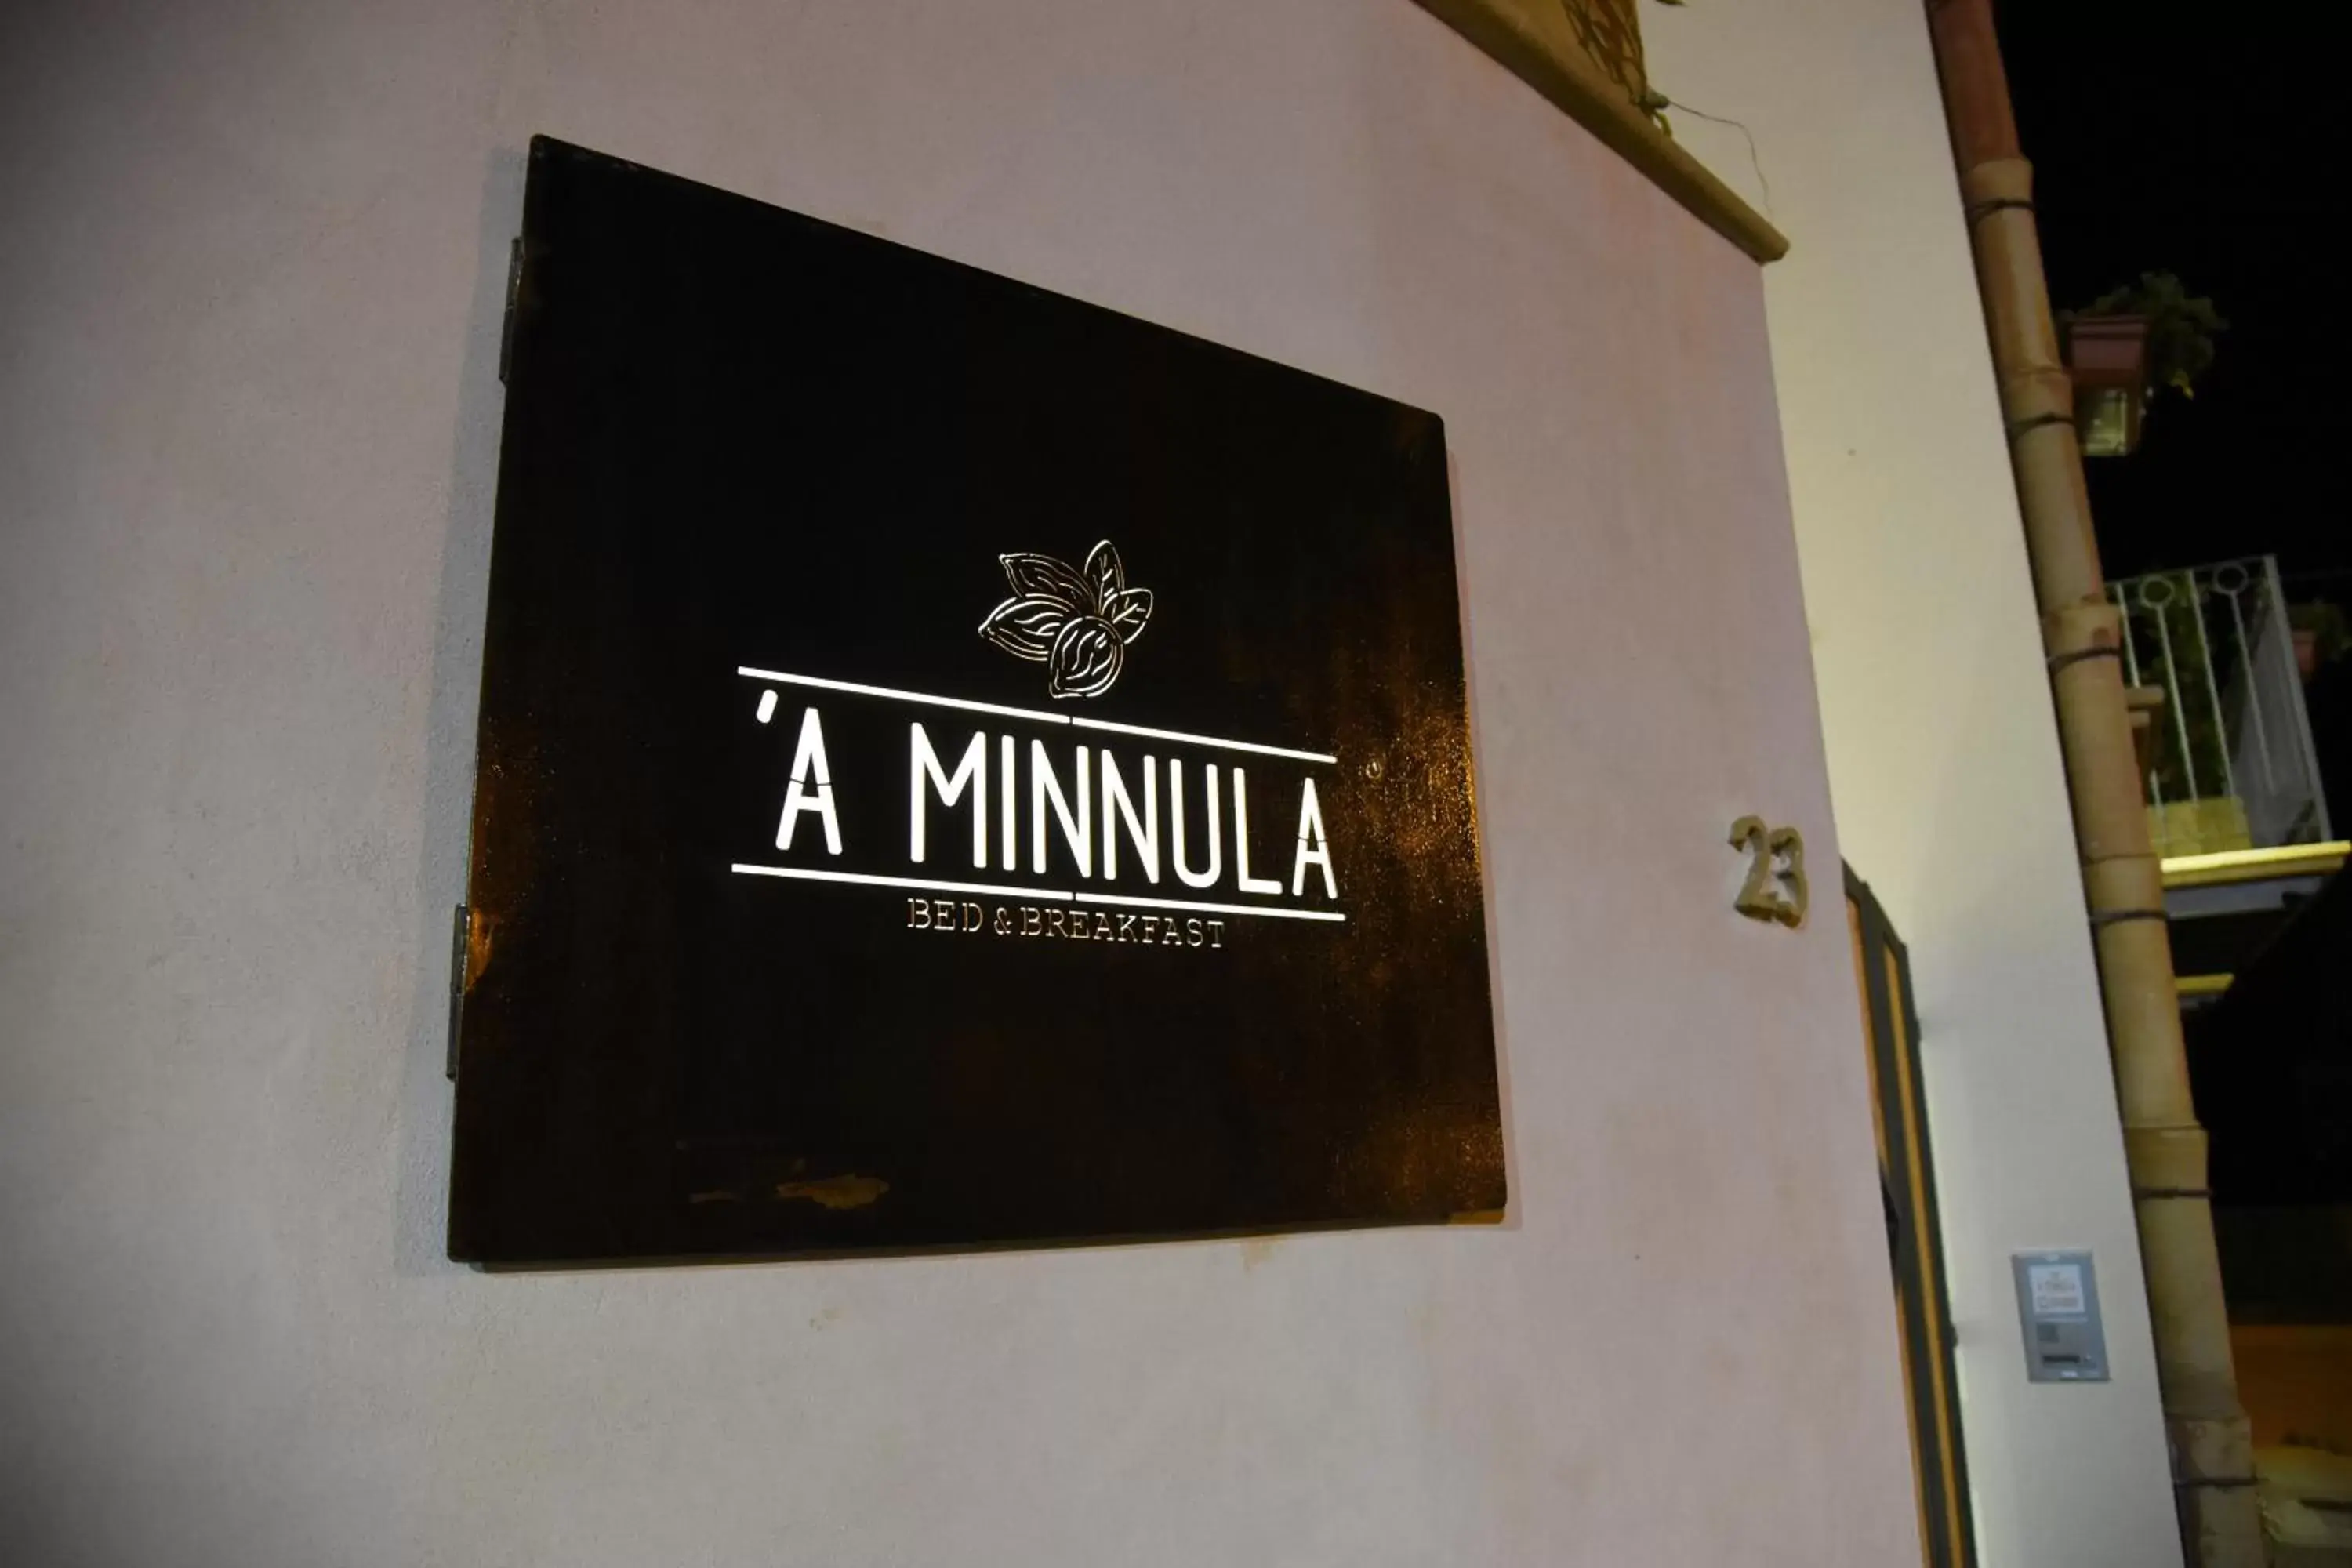 Property logo or sign, Property Logo/Sign in ‘A Minnula